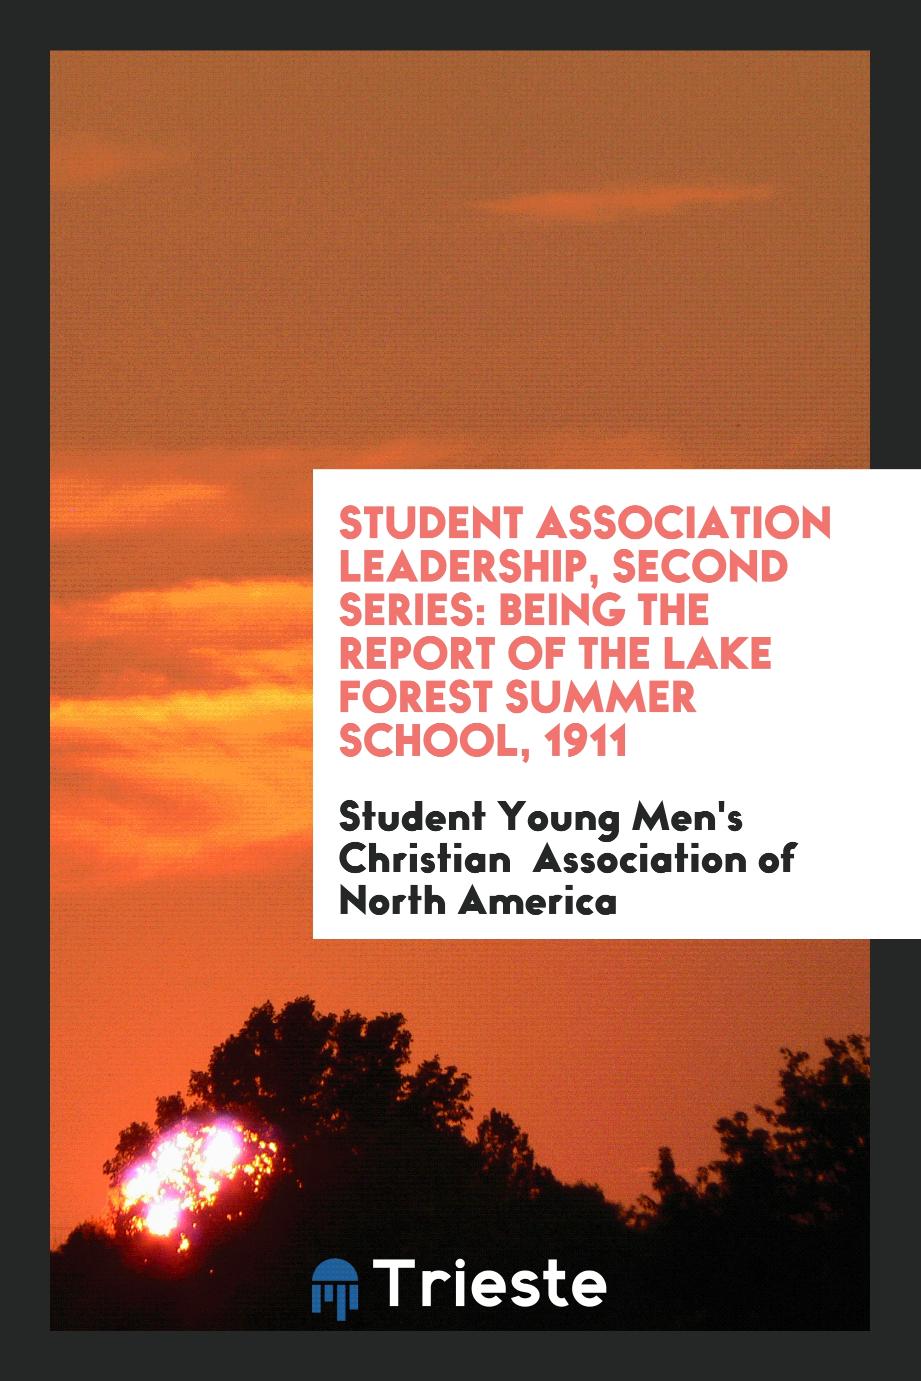 Student Association Leadership, Second Series: Being the Report of the Lake Forest Summer School, 1911